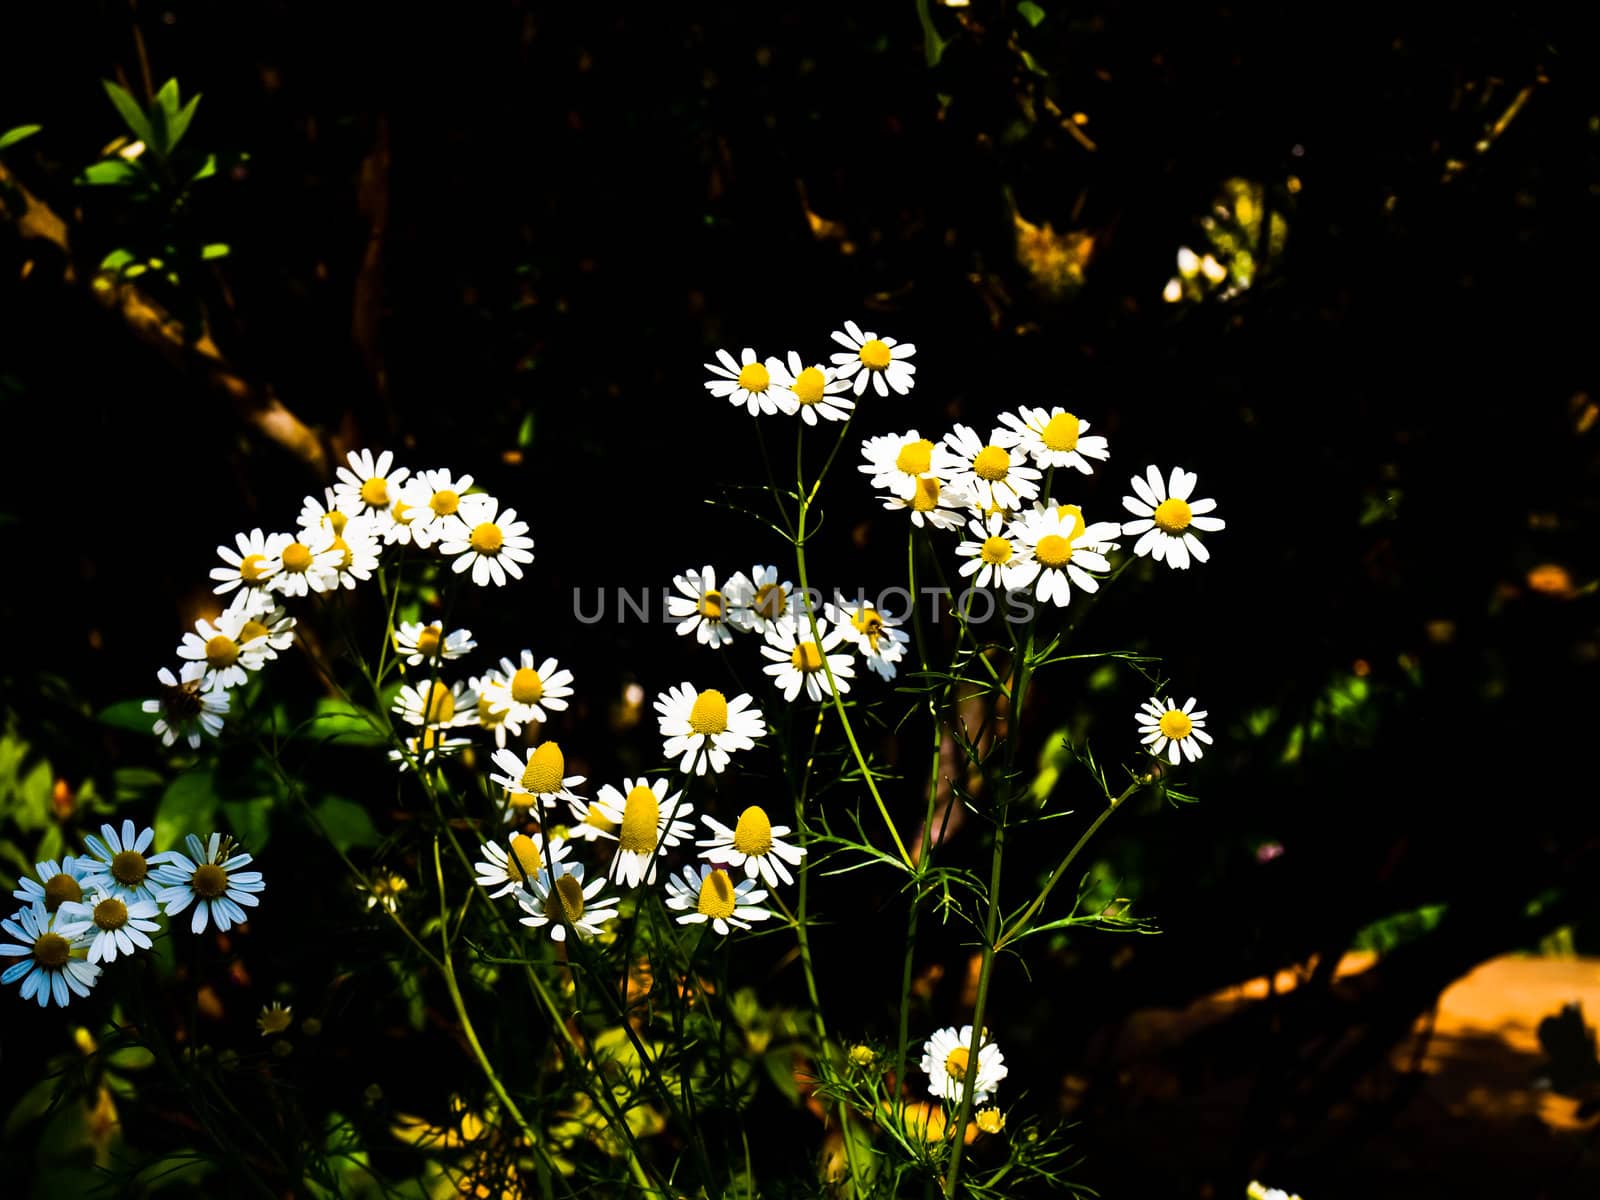 white daisies in nature with black background by gururugu